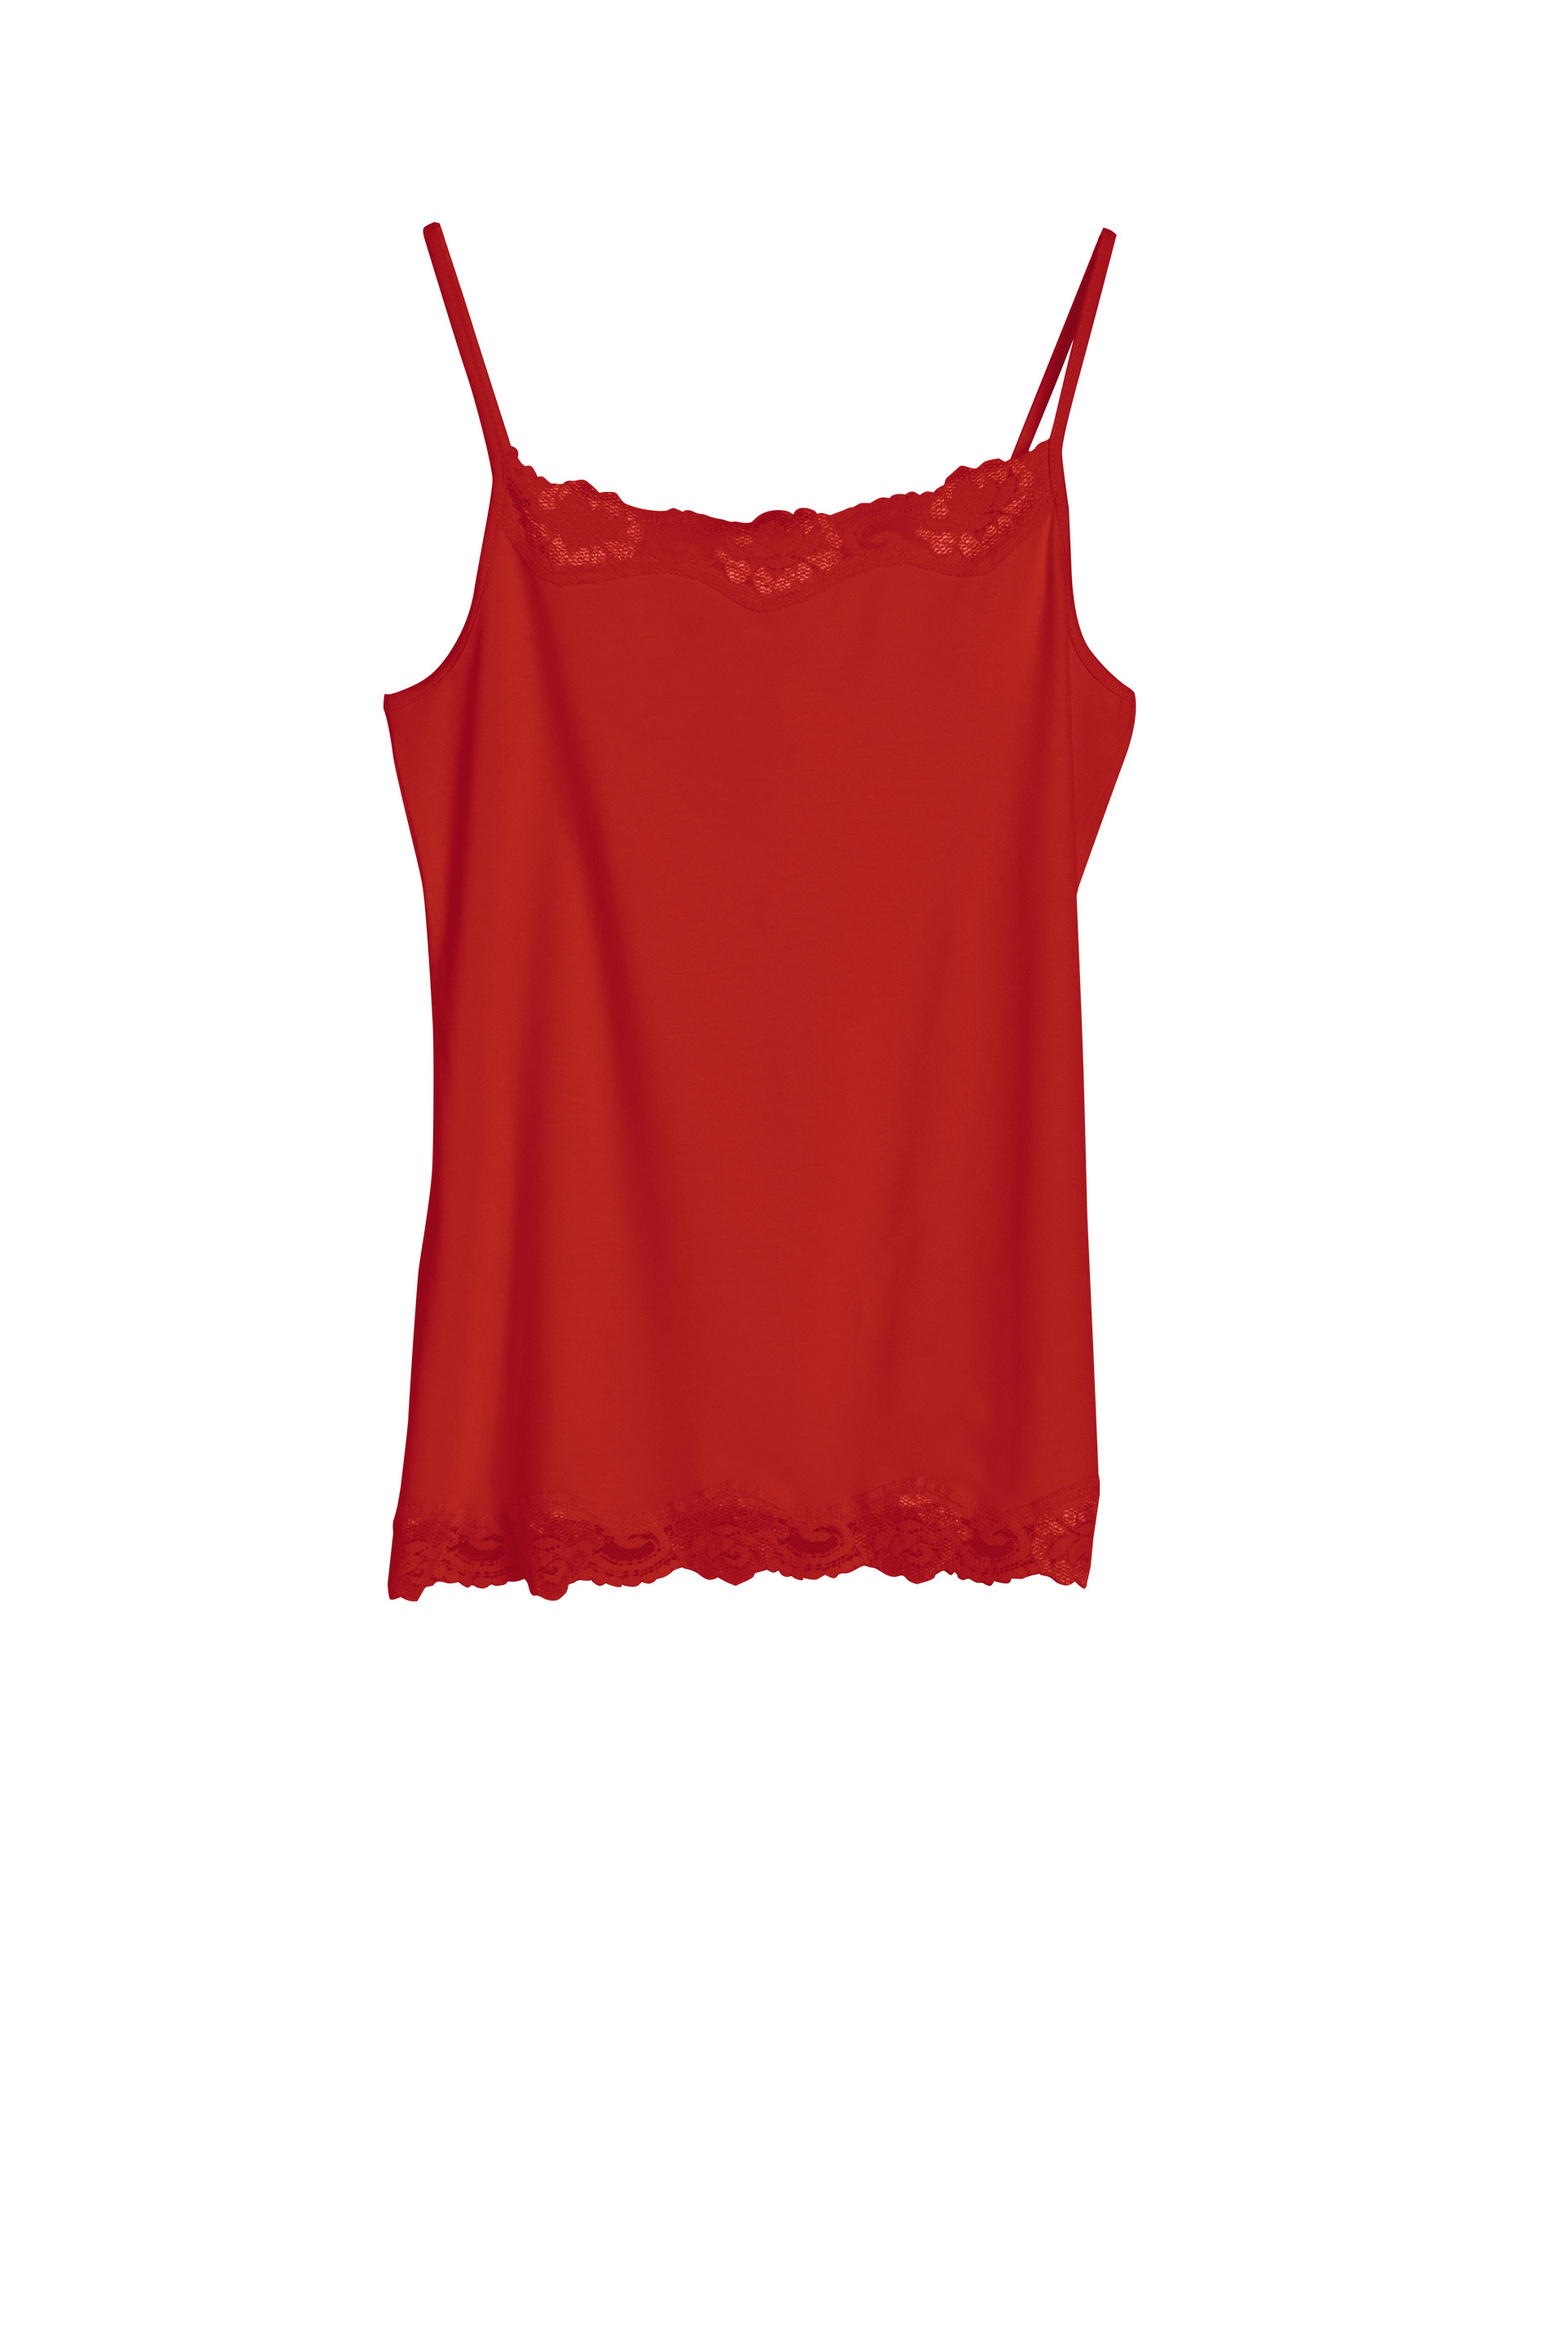 7200_lace_camisole_brick_red.jpg